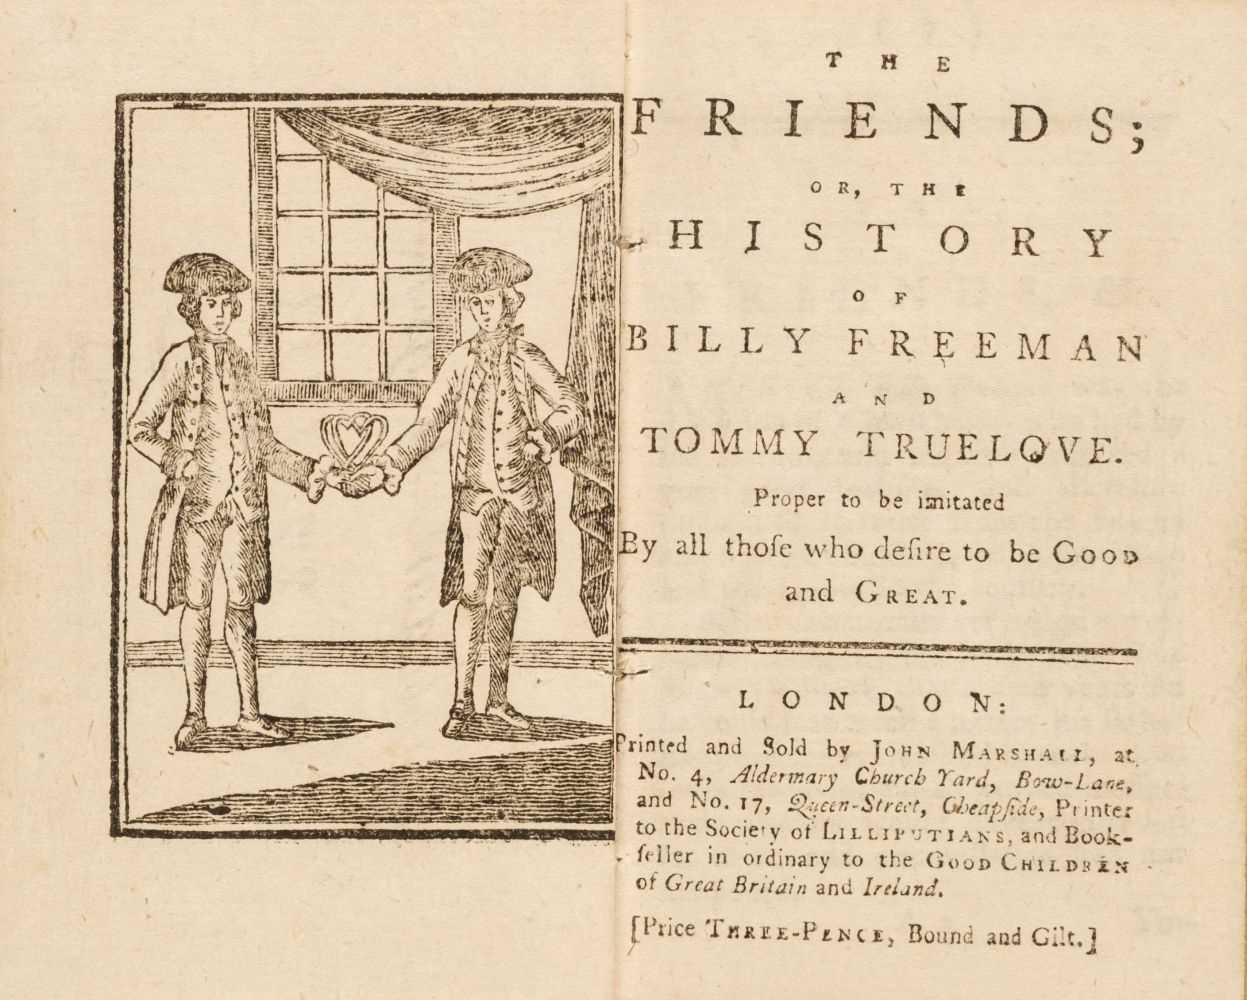 Lot 467 - Marshall (John, Printer). The Friends; or, the History of Billy Freeman and Tommy Truelove